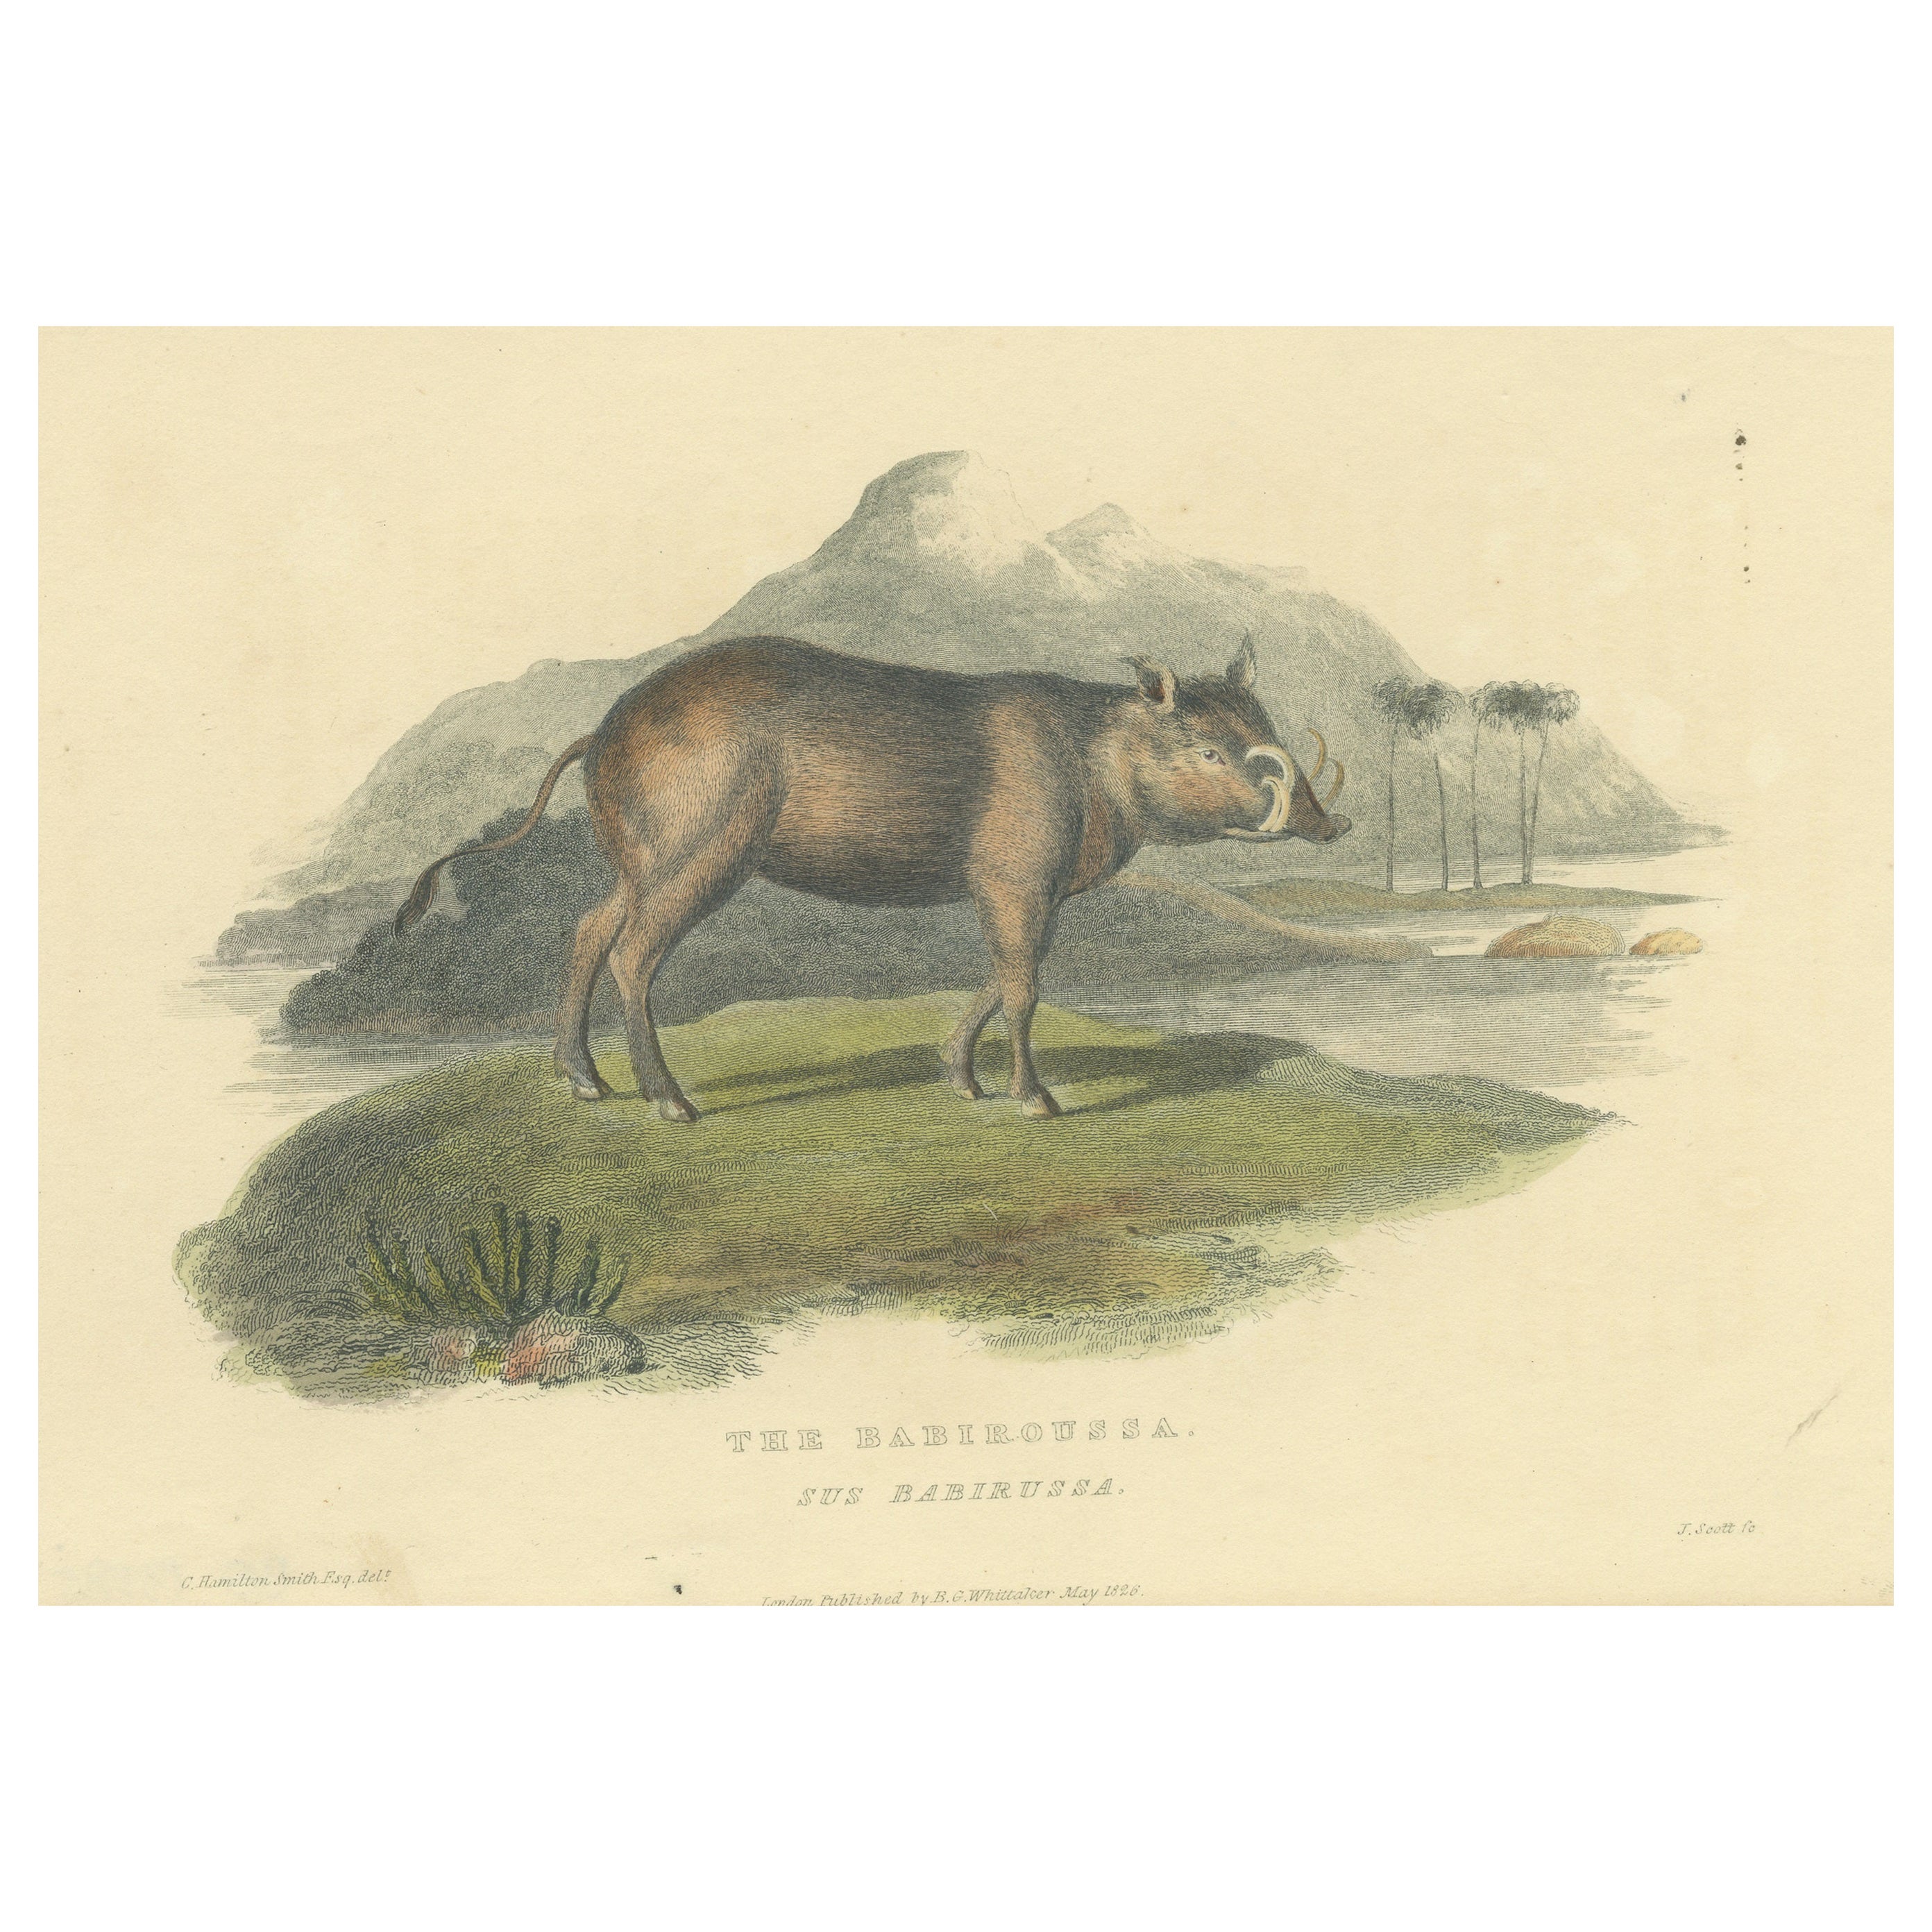 Antique Print with Hand Coloring of a Babirusa For Sale